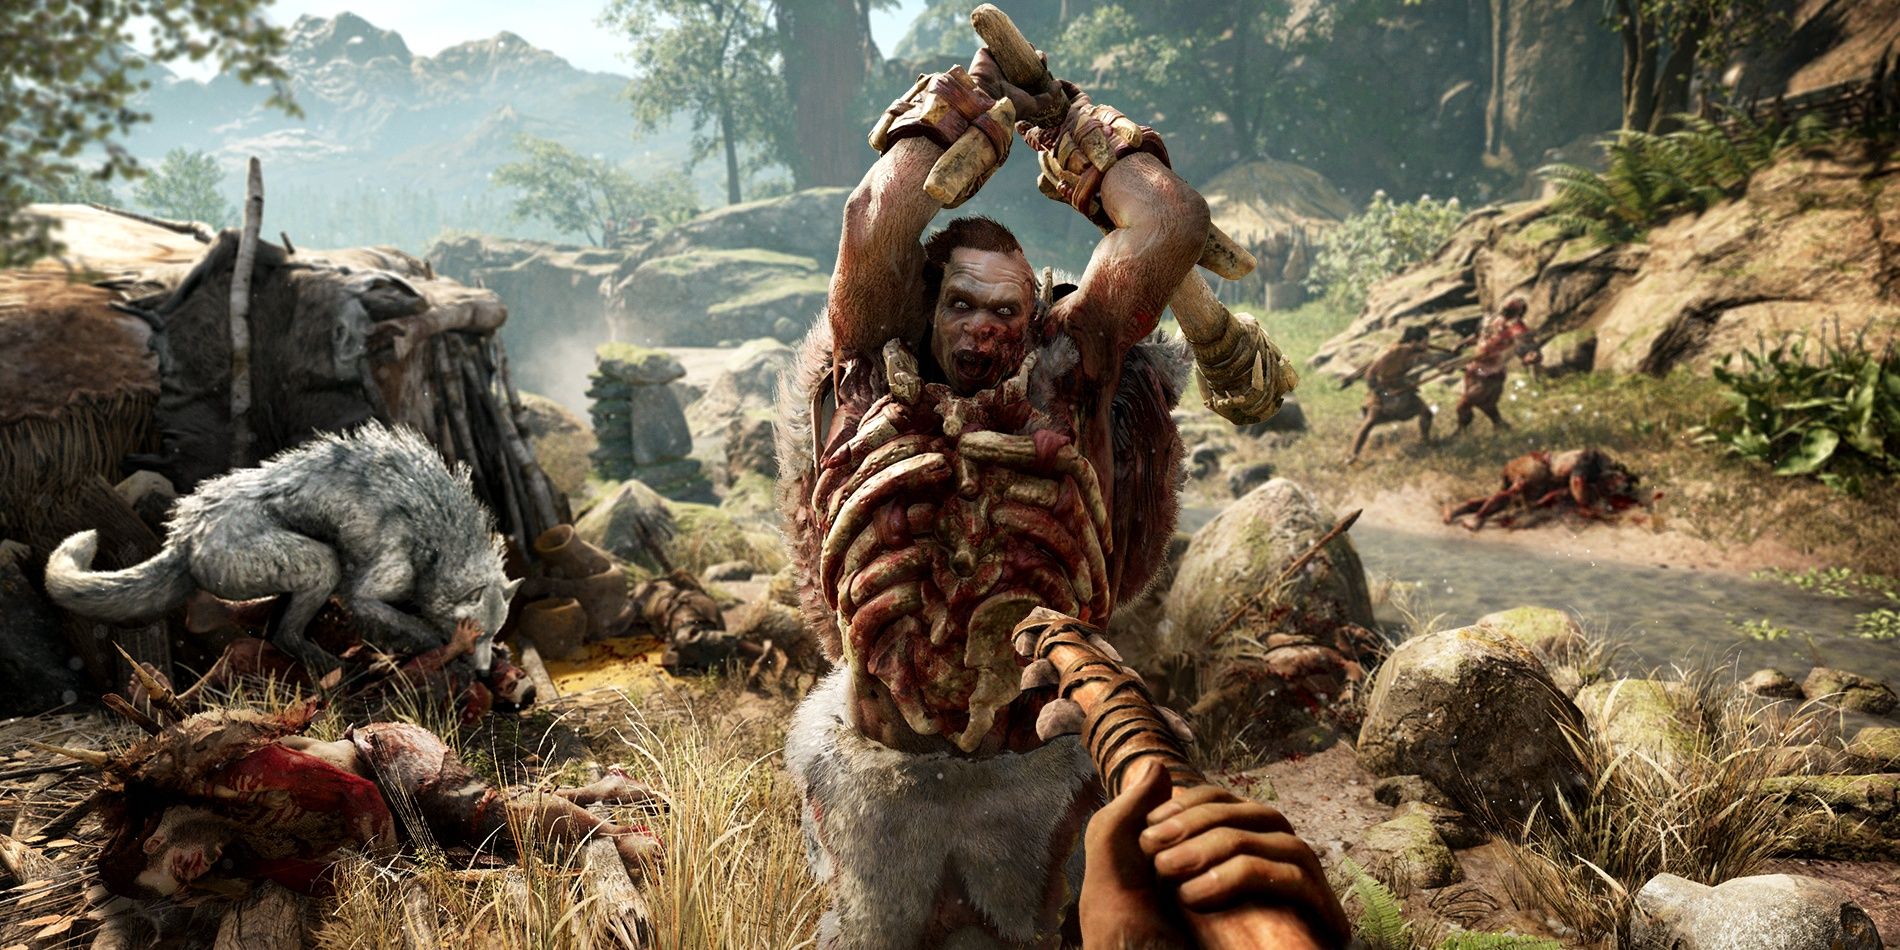 Far Cry Primal No HUD showing melee combat with a spear